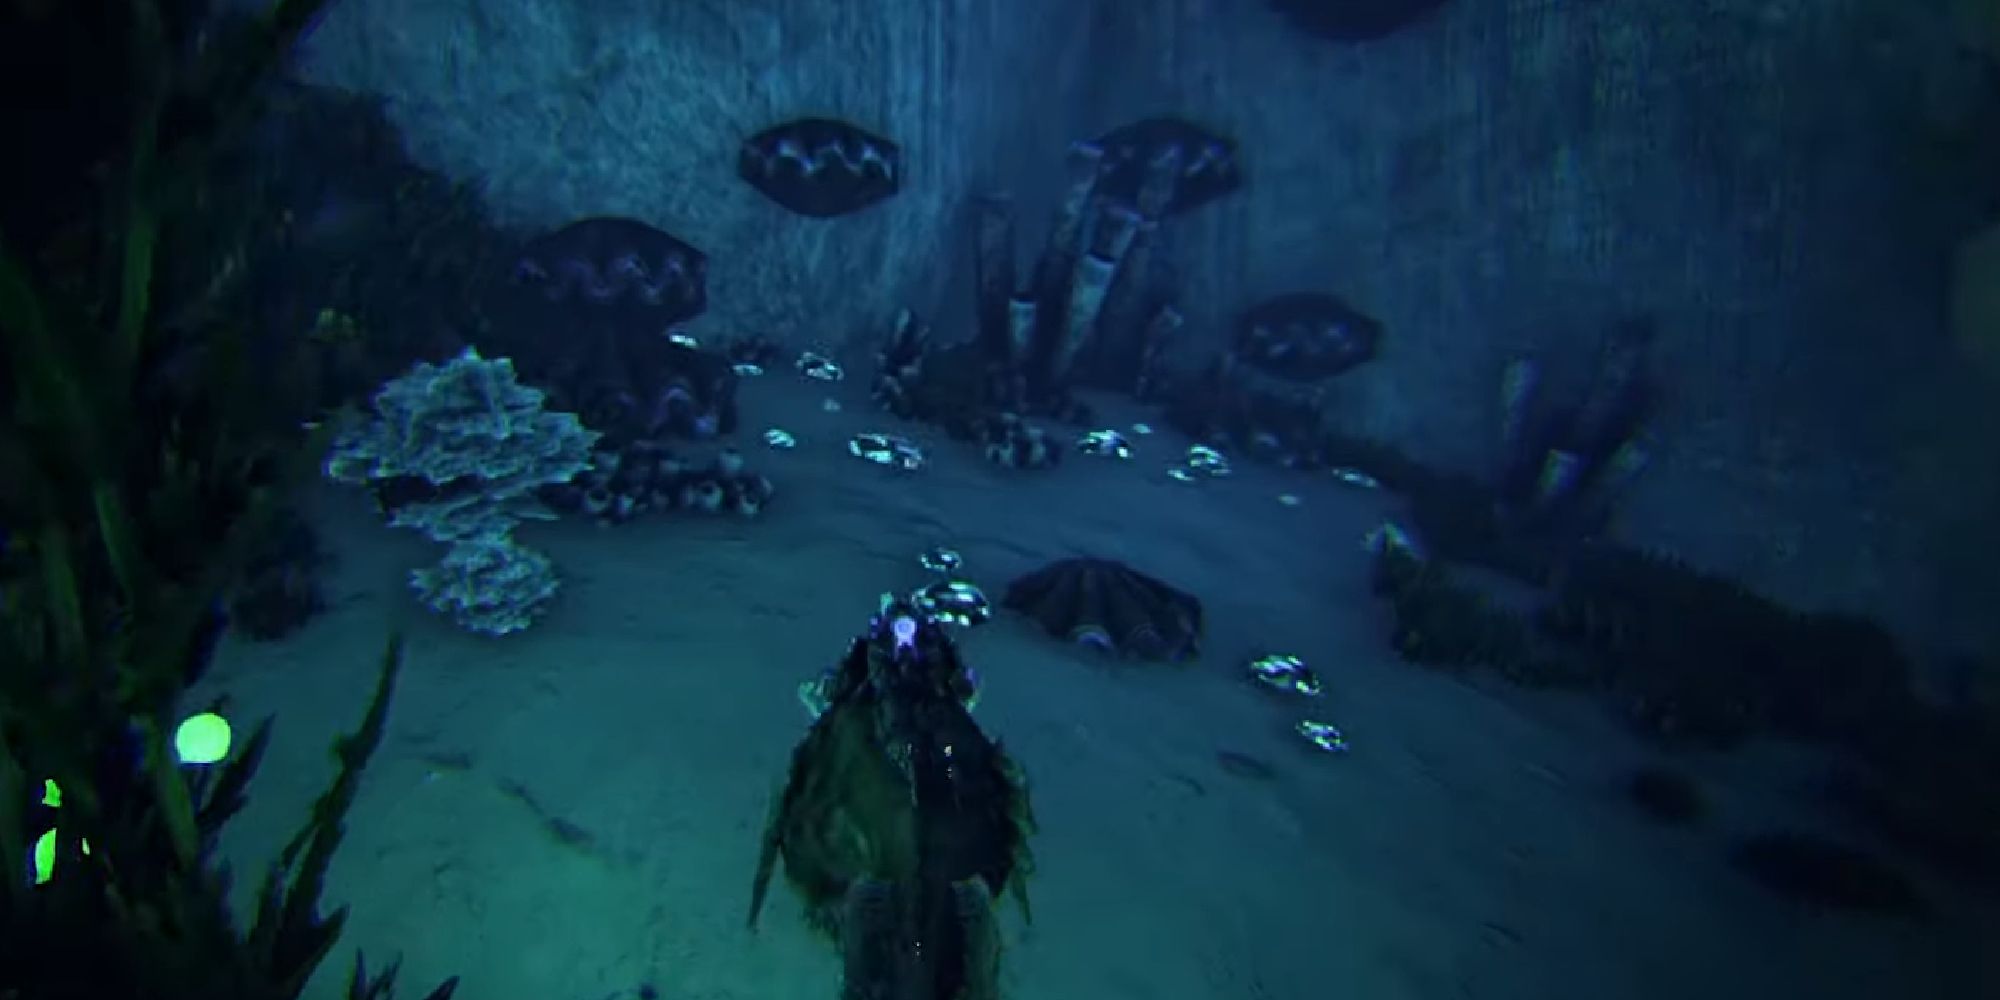 ark survival clams with pearls in distance, showing player riding an angler fish